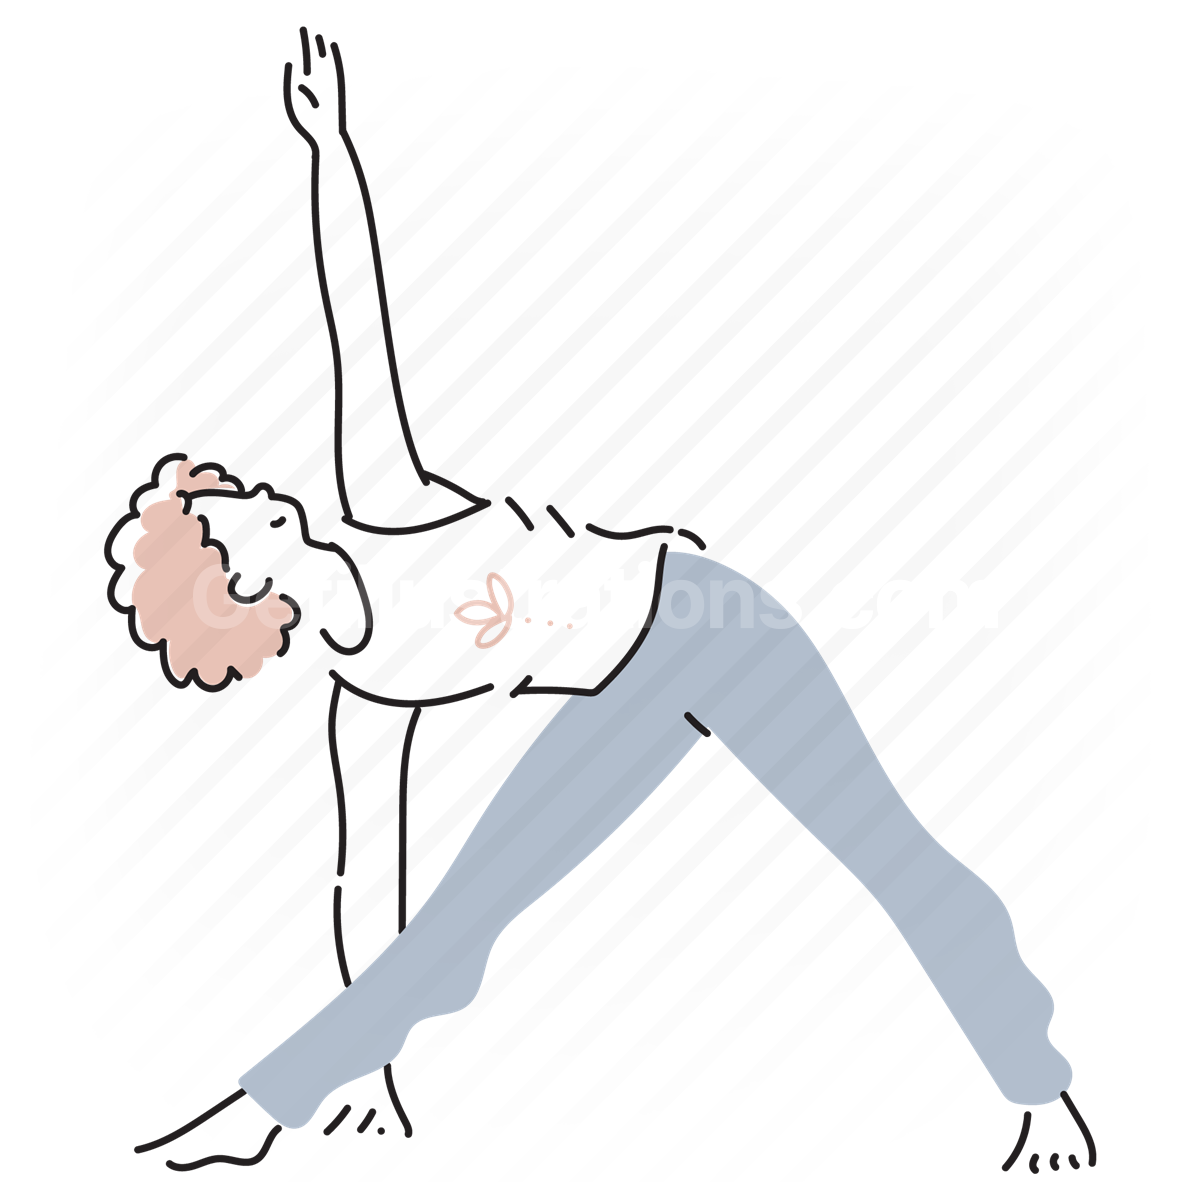 Yoga Poses PNG Images, Yoga Poses Clipart Free Download